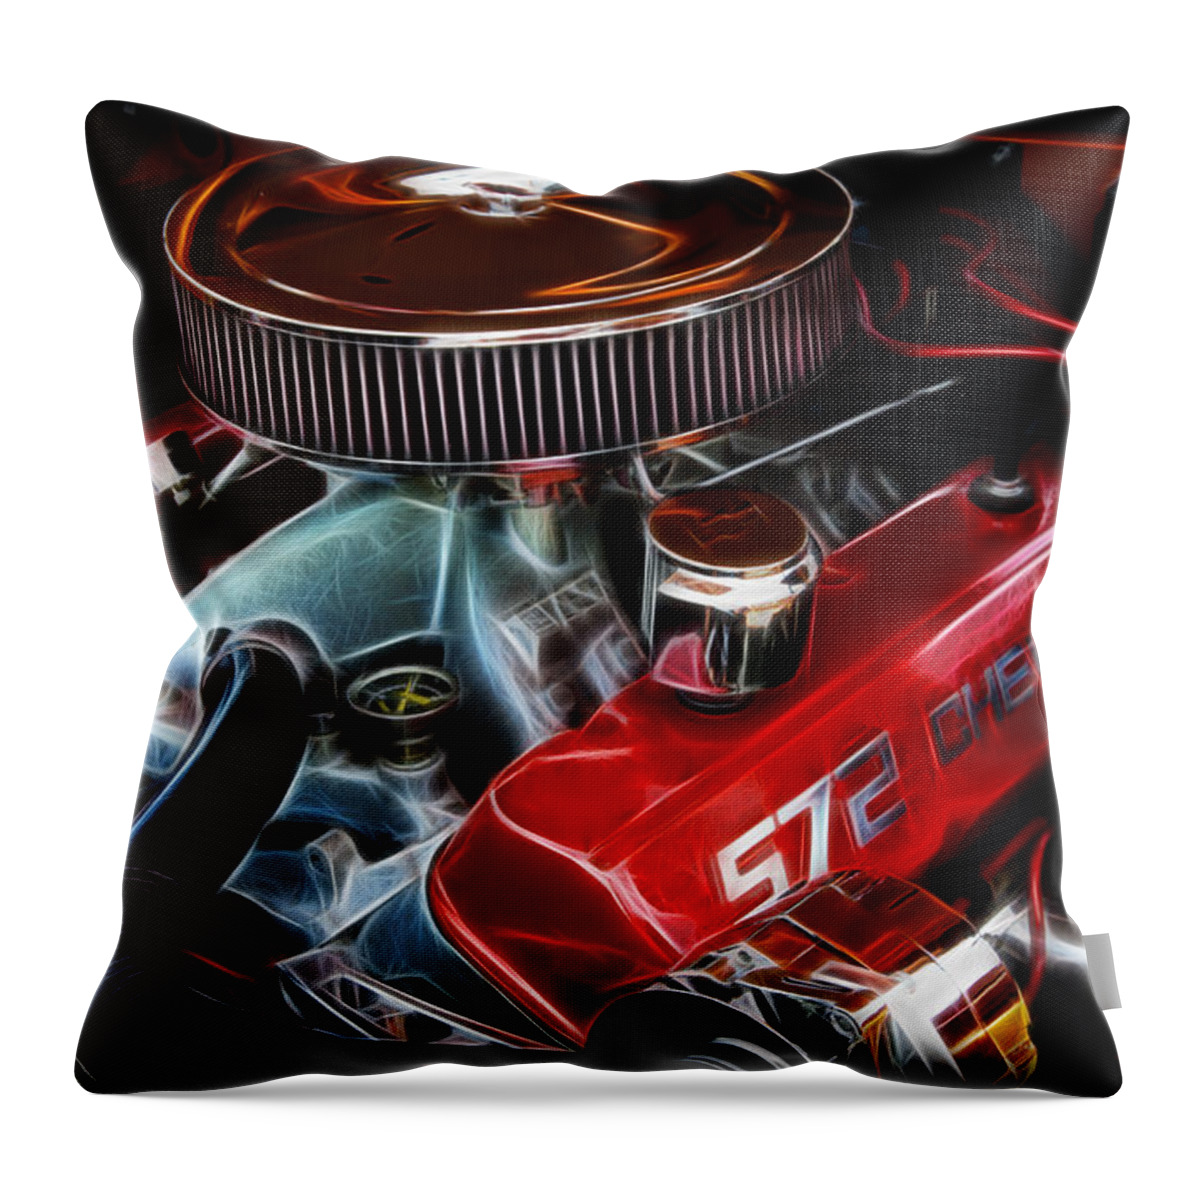 Air Throw Pillow featuring the photograph Chevy 572 Fractal by Ricky Barnard